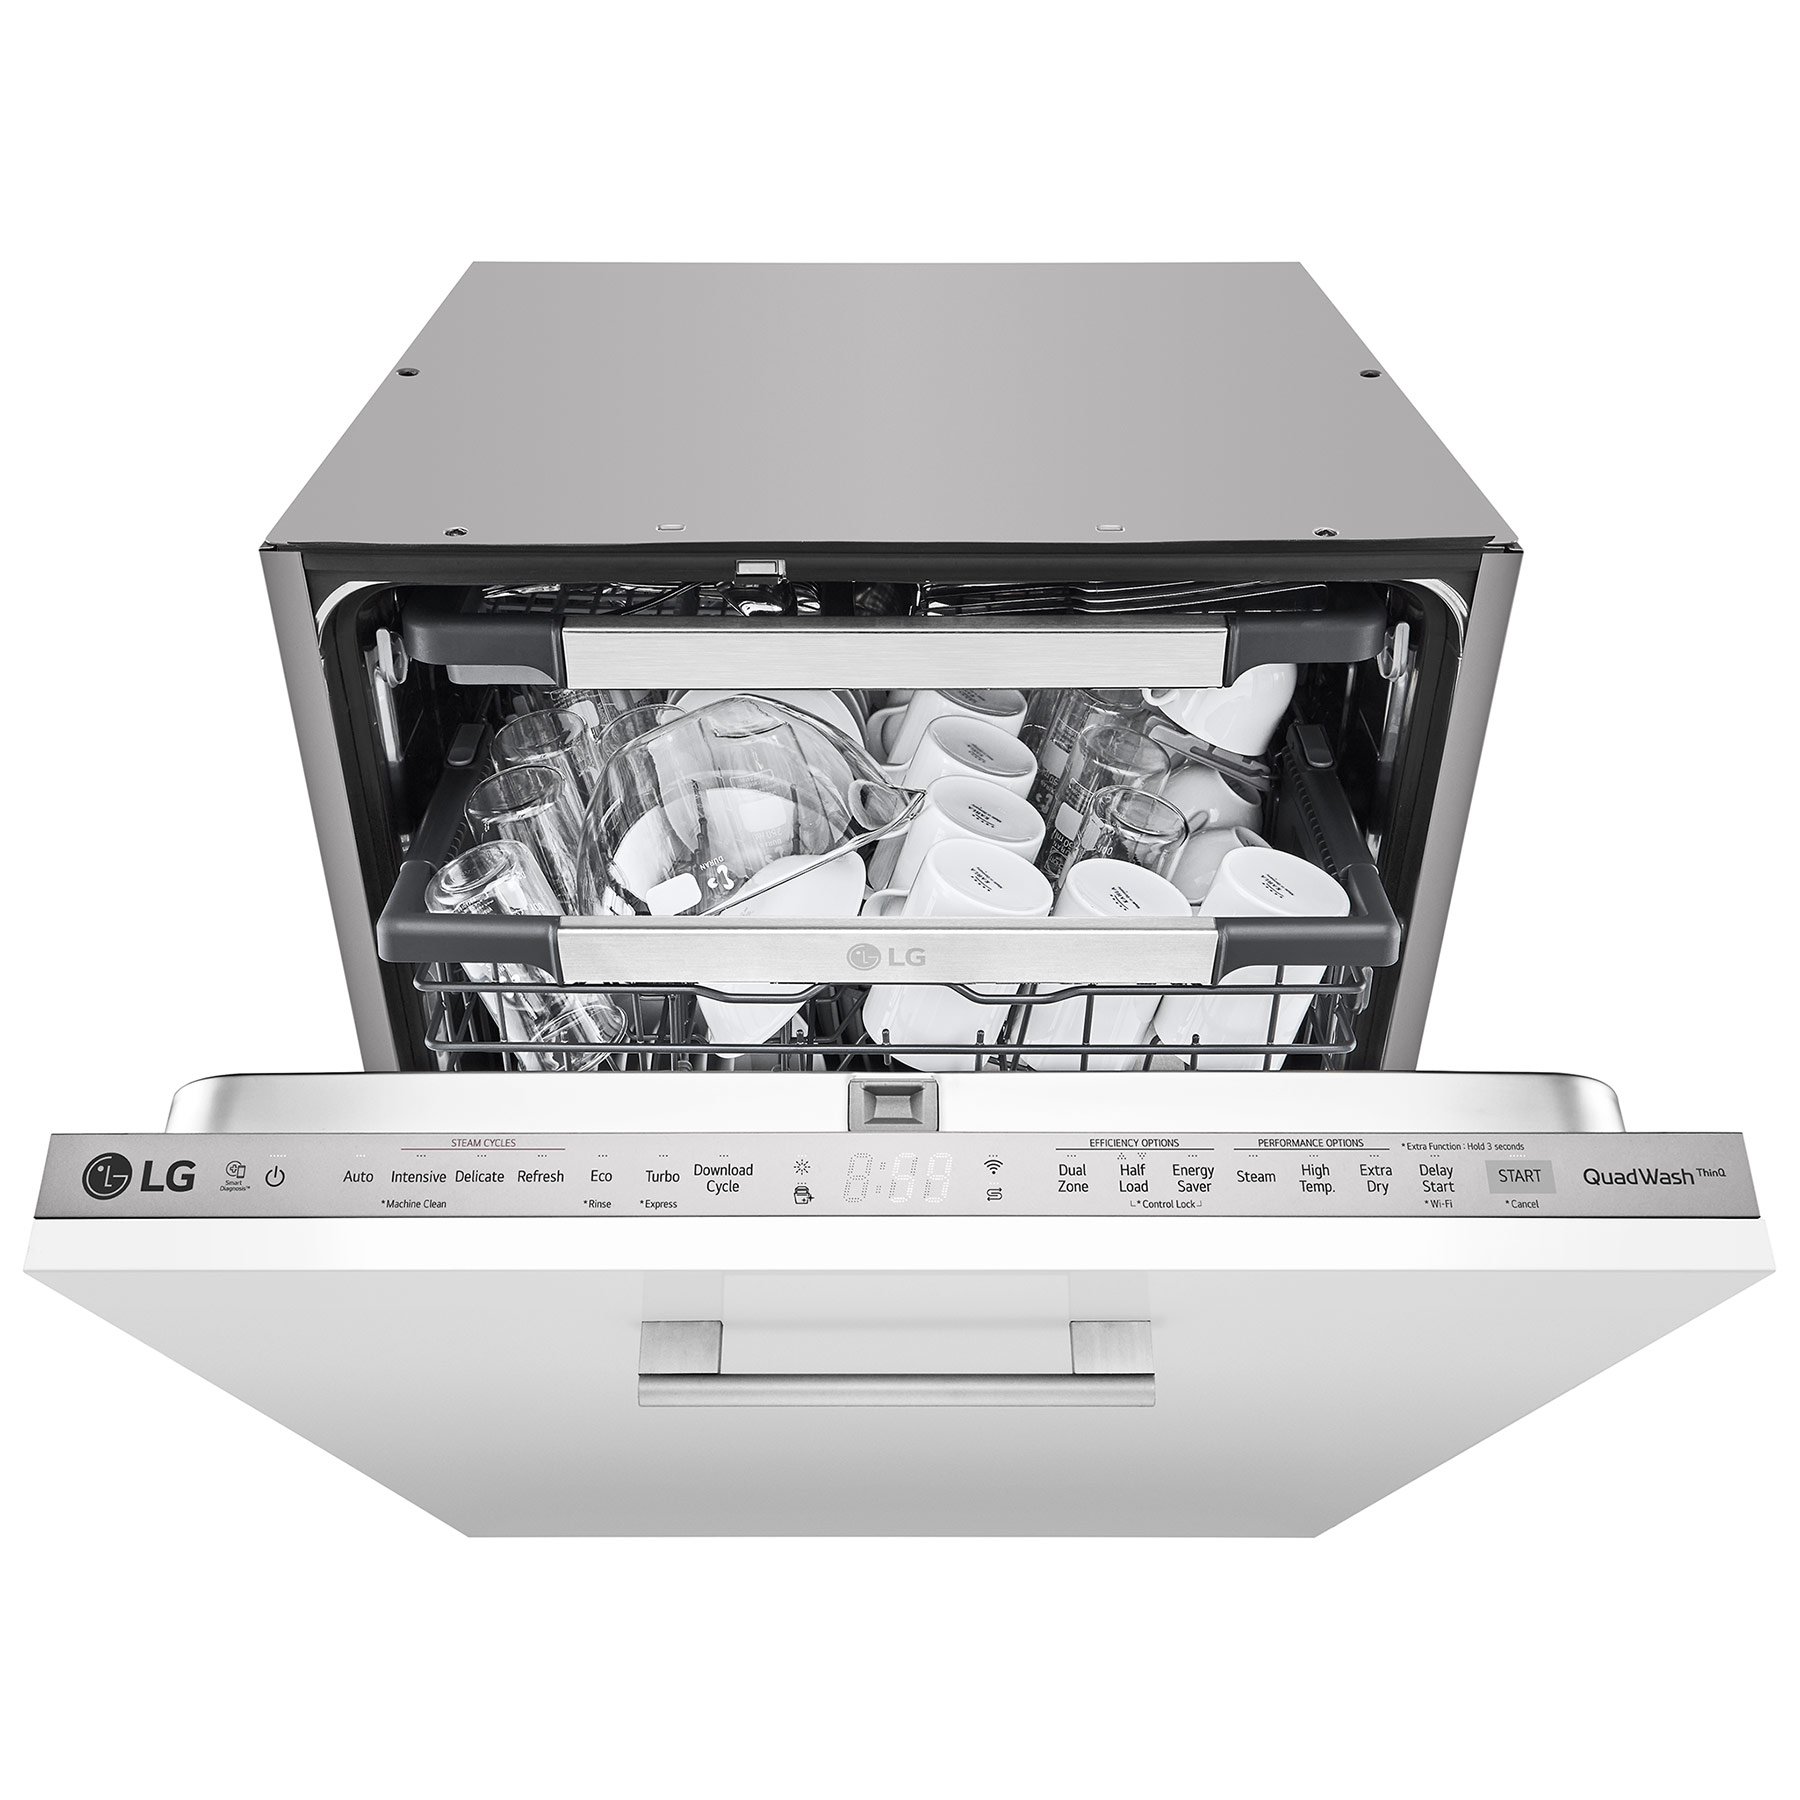 Image of LG DB425TXS 60cm Fully Integrated Dishwasher 14 Place D Rated Wi Fi